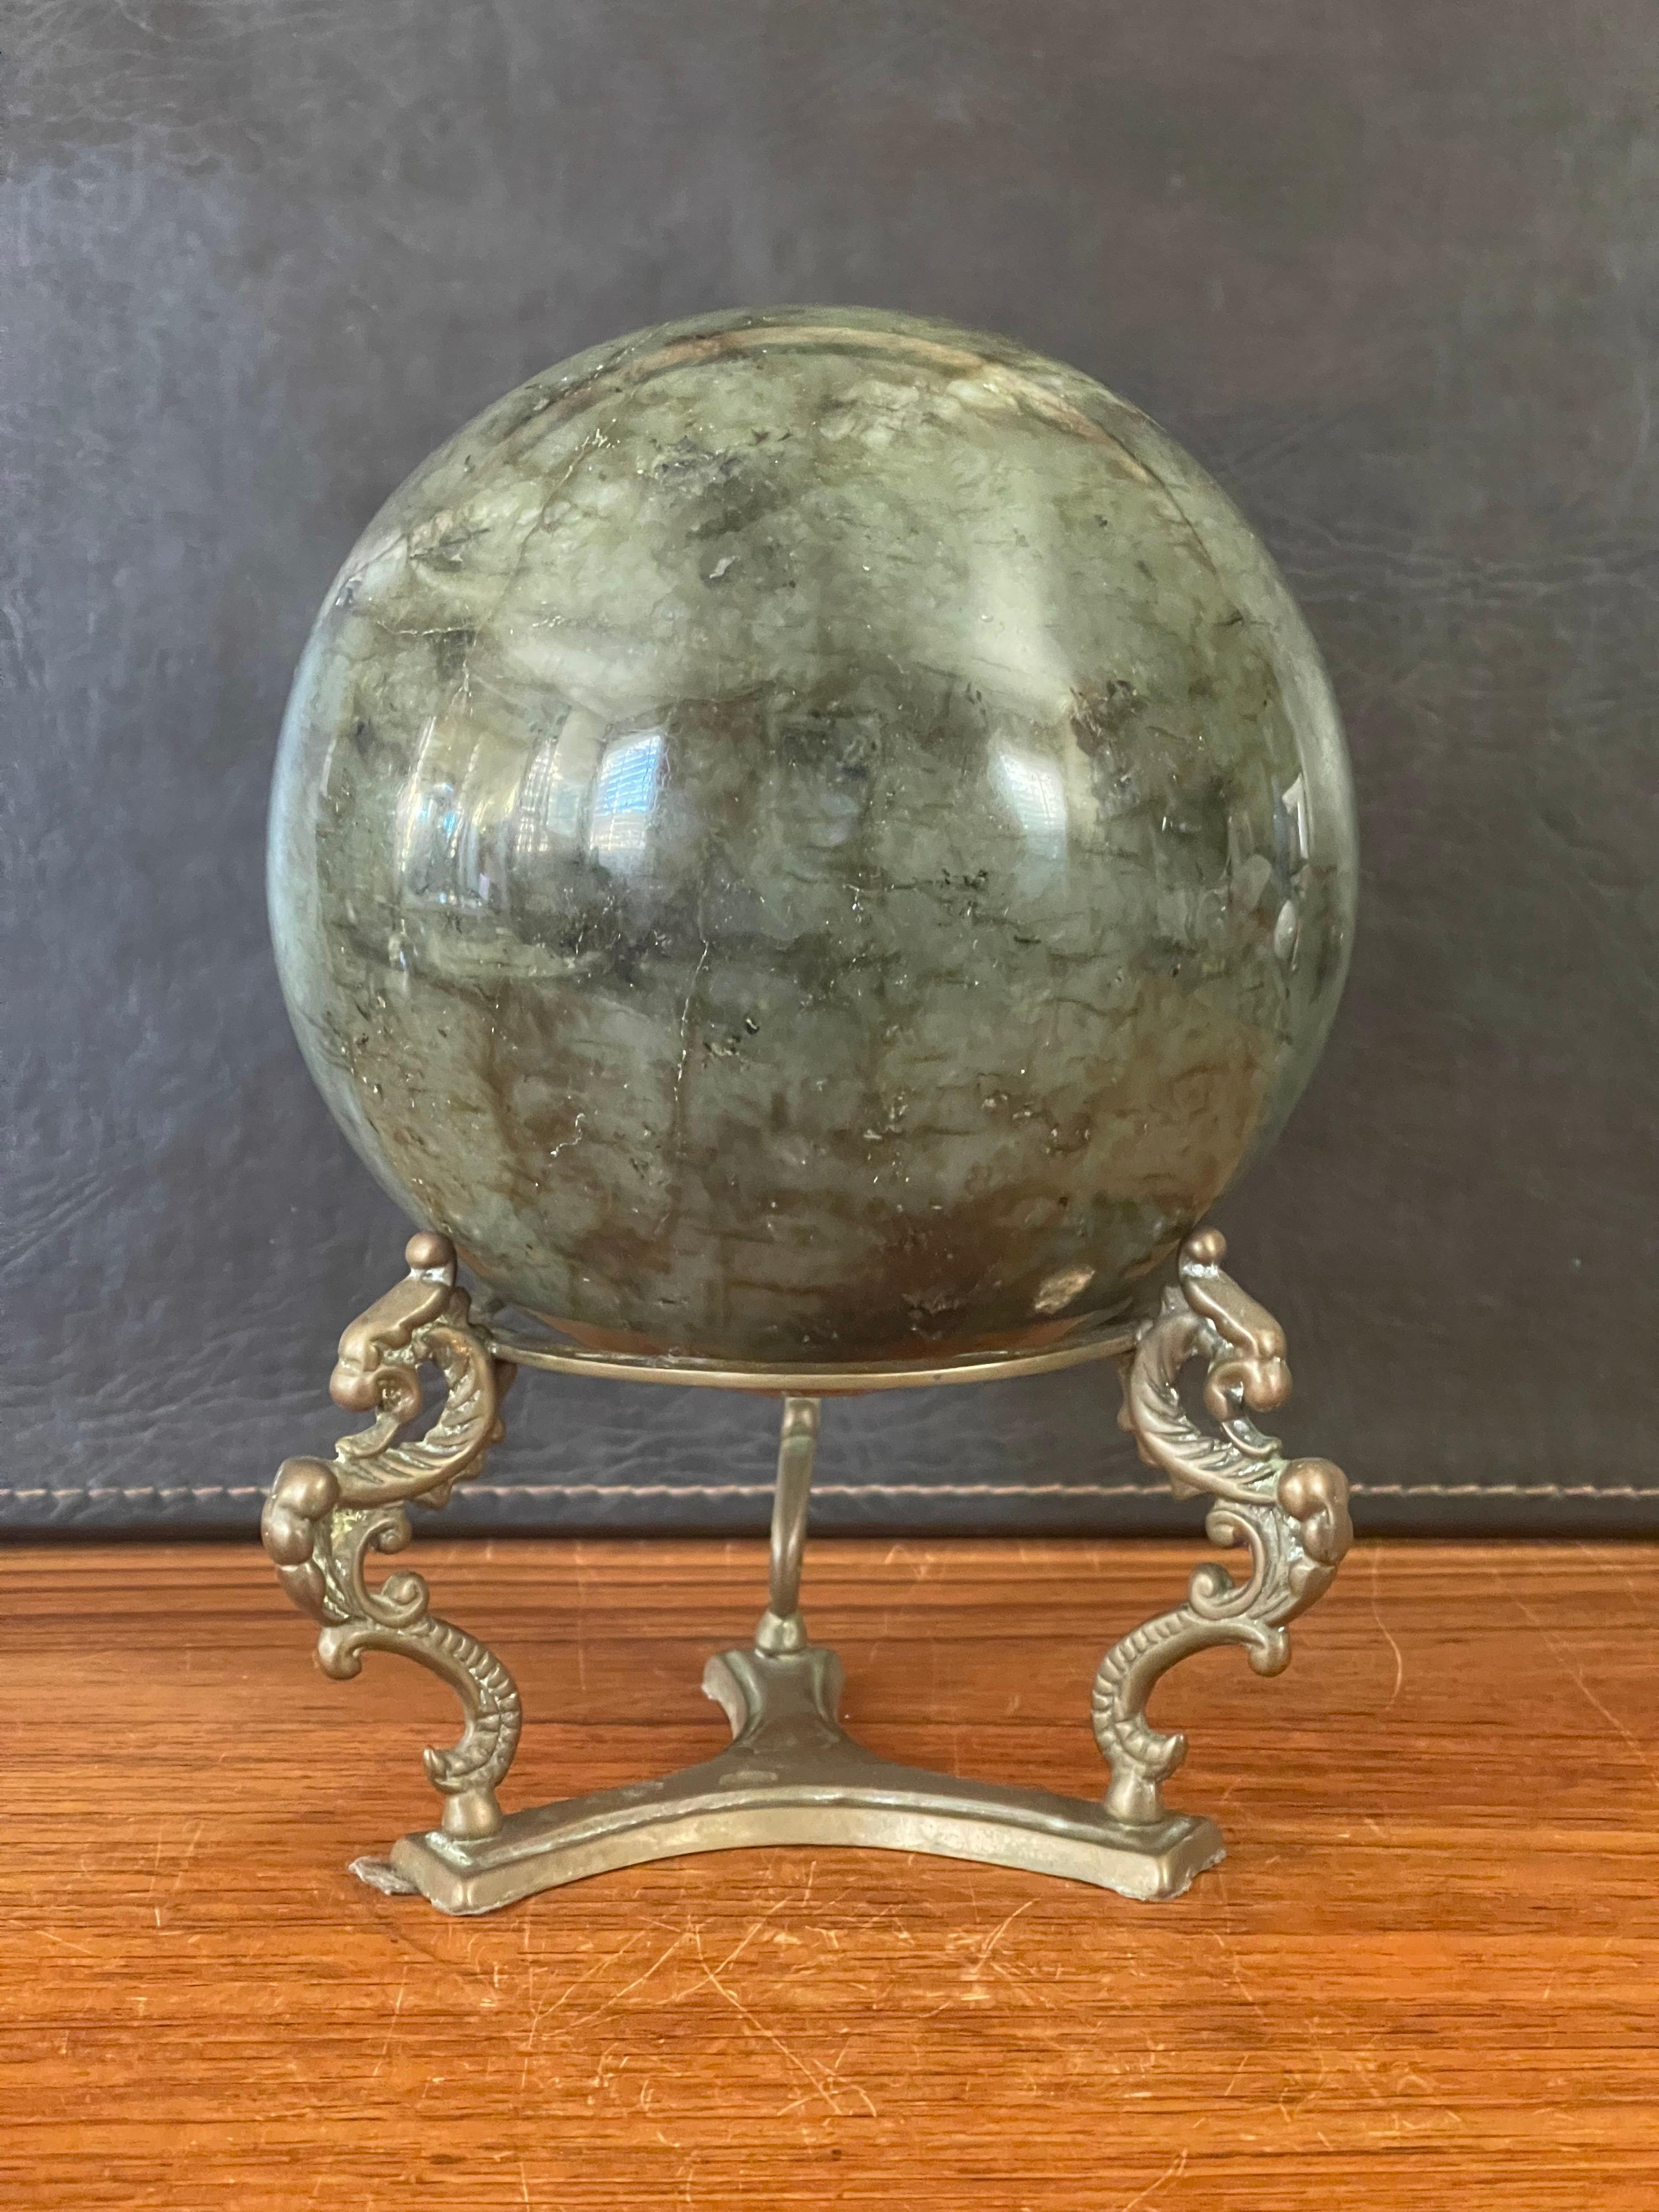 Beautiful large solid green marble decorative sphere on bronze base with three griffins, circa 1970s. The piece is in very good condition with no chips or cracks; it has a nice polished finish with with white and grey veining and speckles. The